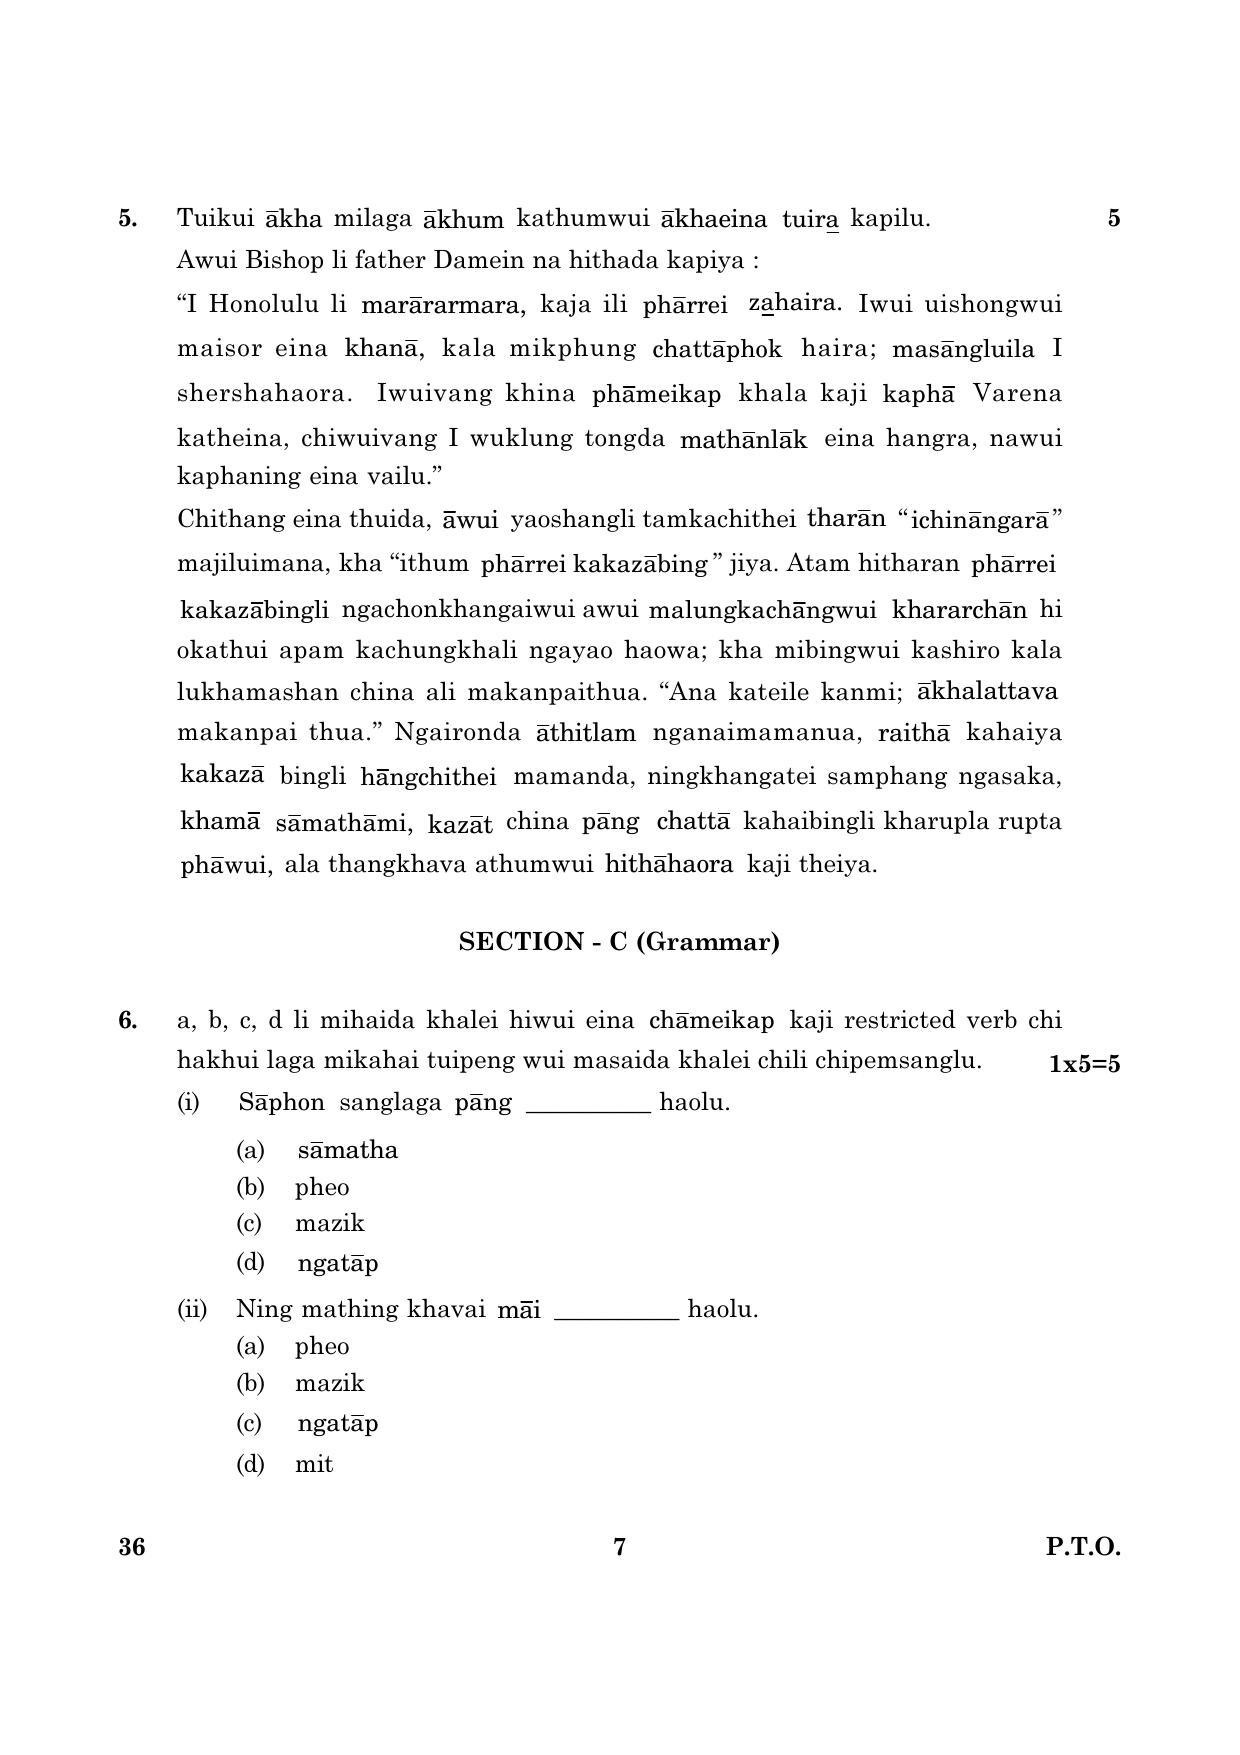 CBSE Class 10 036 Tangkhul (English) 2016 Question Paper - Page 7